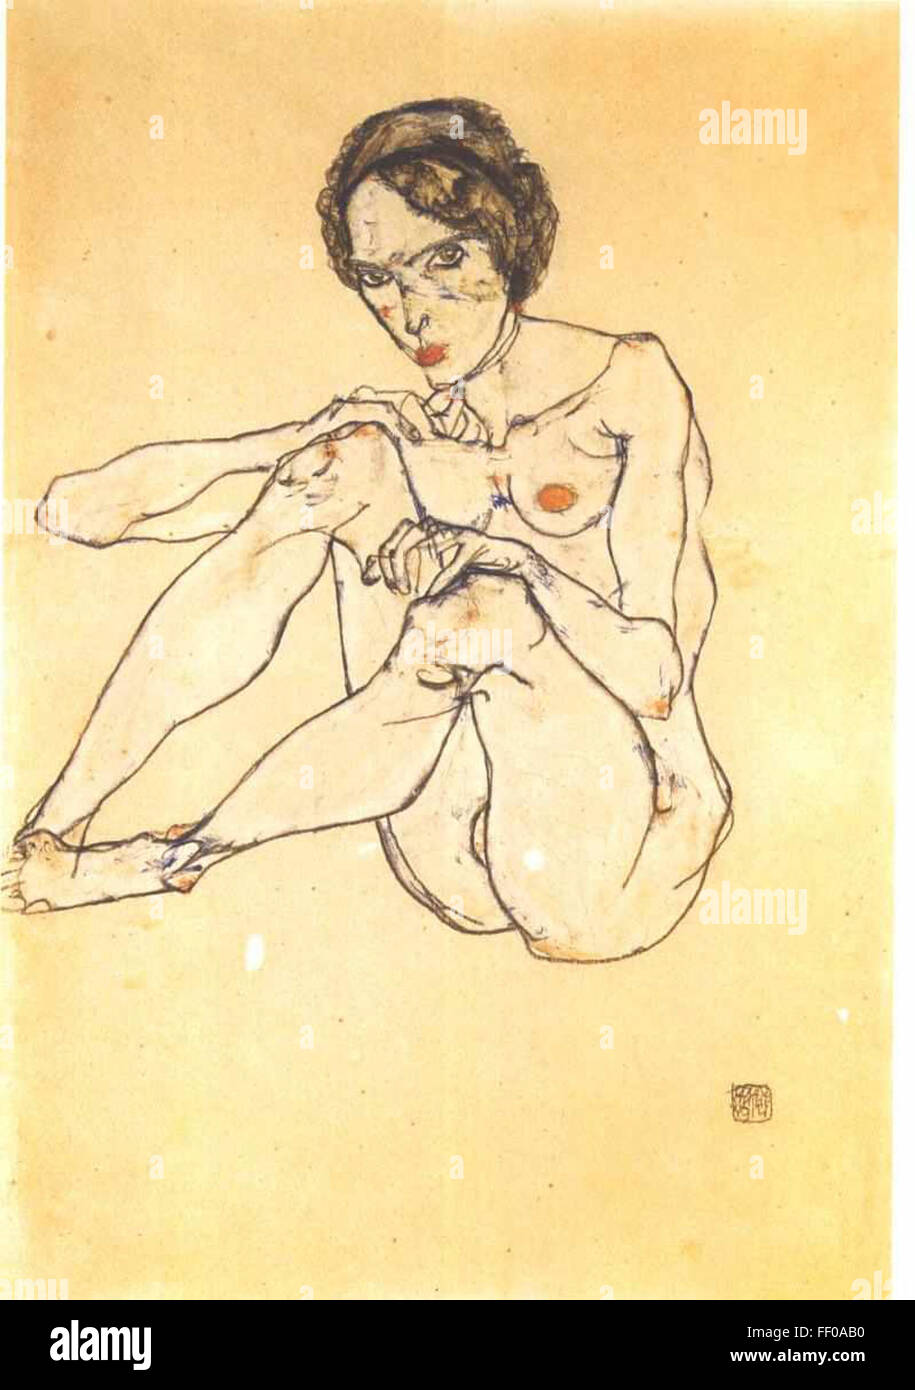 Drawing by Egon Schiele Stock Photo